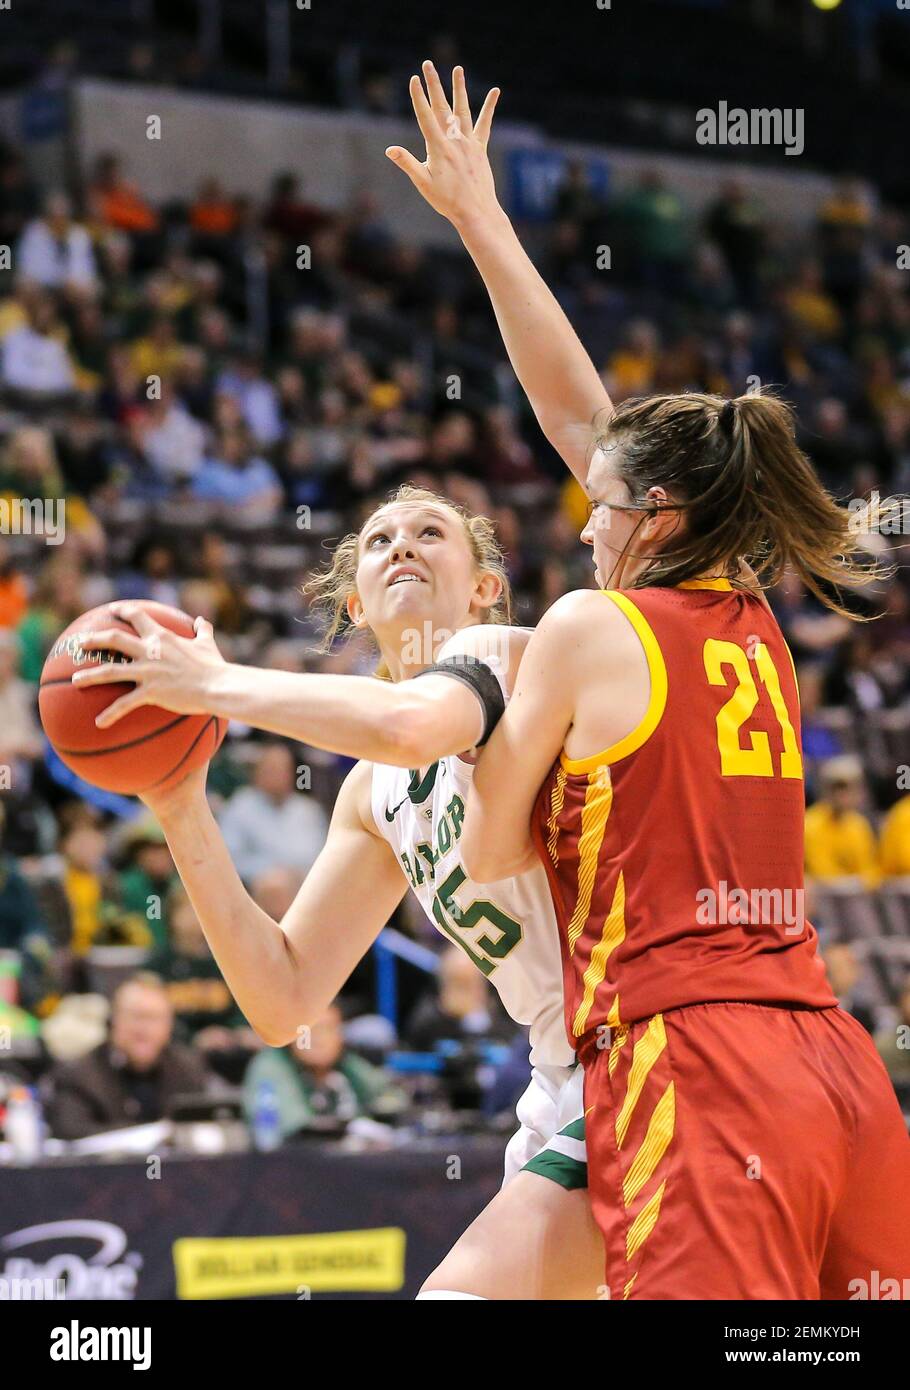 March 11, 2019: Baylor Forward Lauren Cox (15) is defended by Iowa State Guard Bridget Carleton (21) during the Phillips 66 Big 12 Womens Basketball Championship Final game between the Baylor Lady Bears and the Iowa State Cyclones at Chesapeake Energy Arena in Oklahoma City, OK. Gray Siegel/(Photo by Gray Siegel/CSM/Sipa USA) Stock Photo